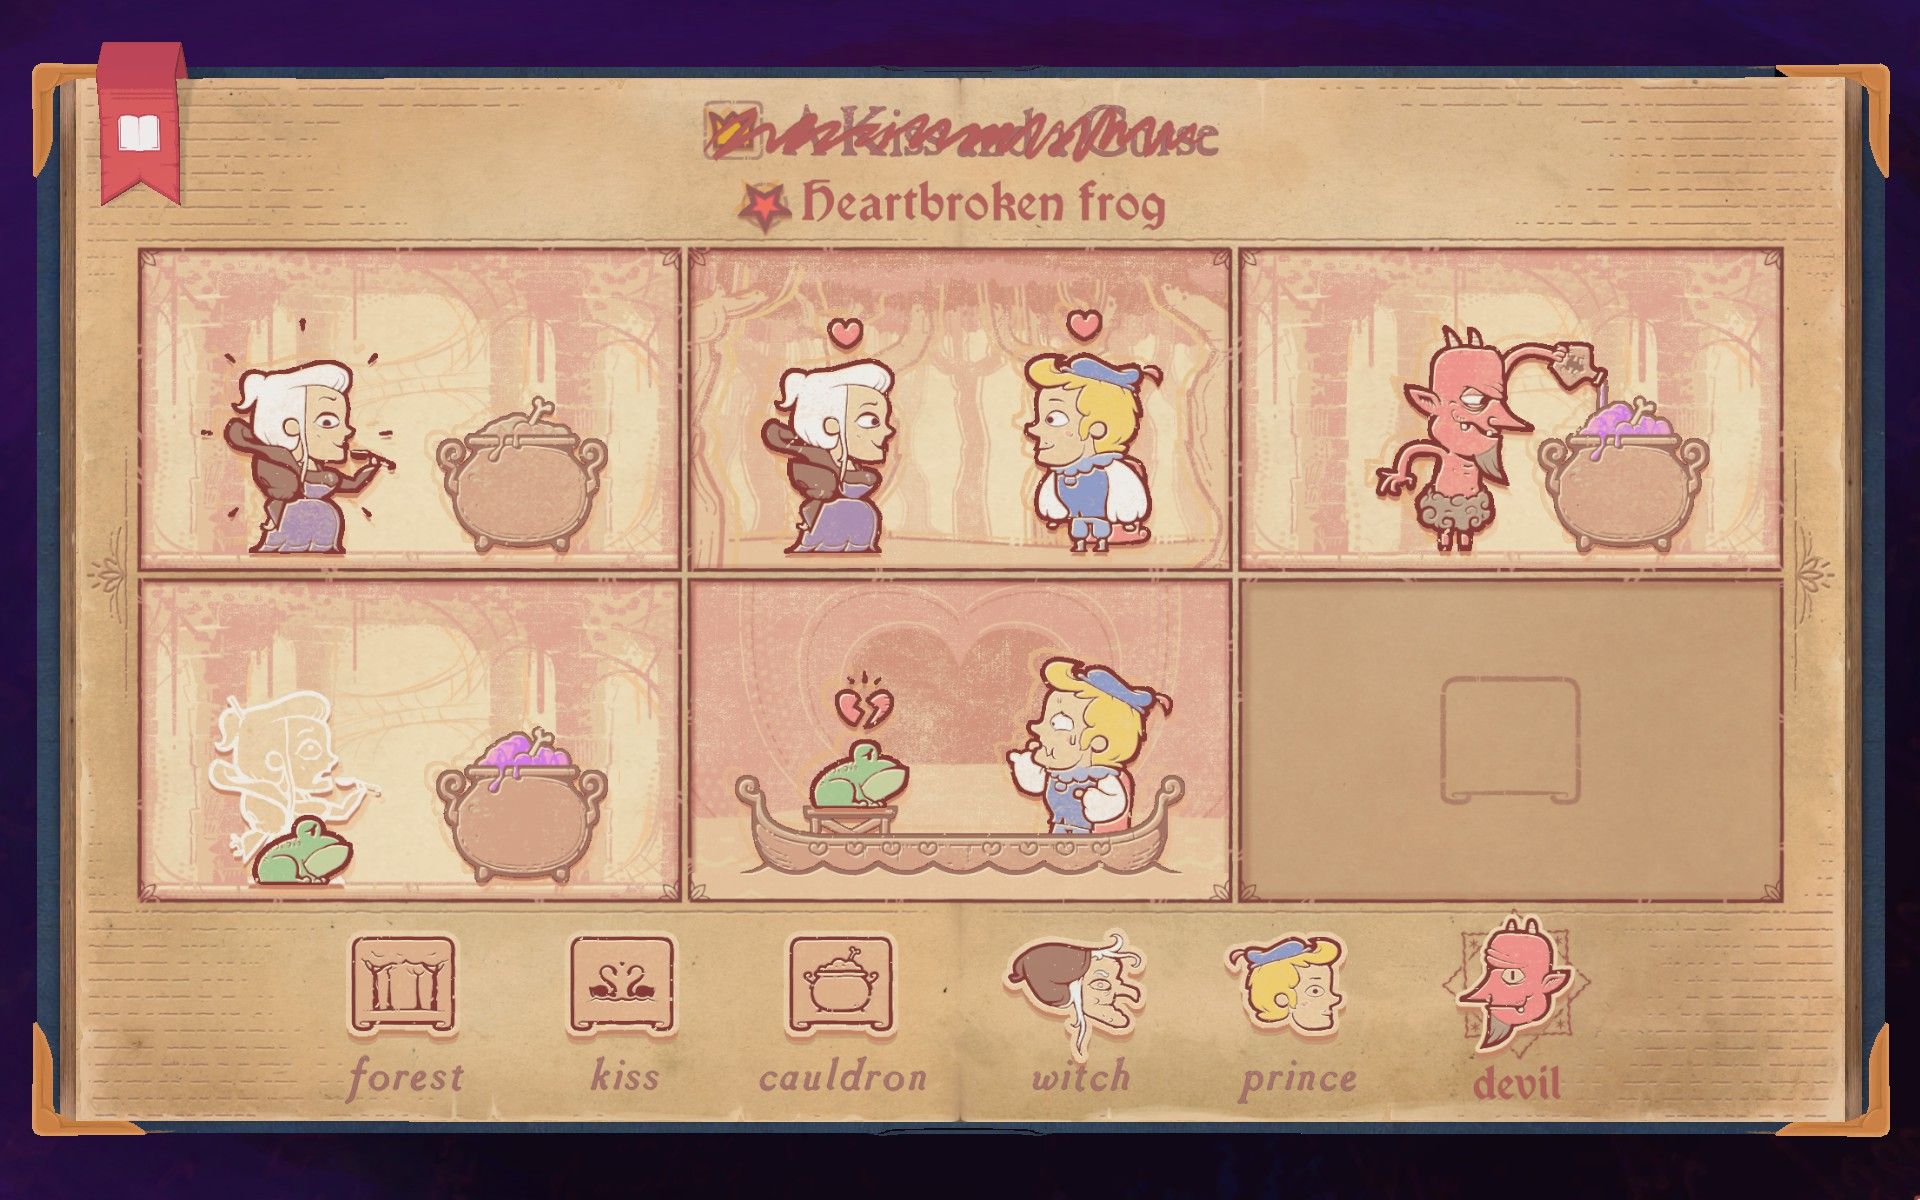 The solution to the devil section of Chapter 5 in Storyteller, showing a heartbroken frog.